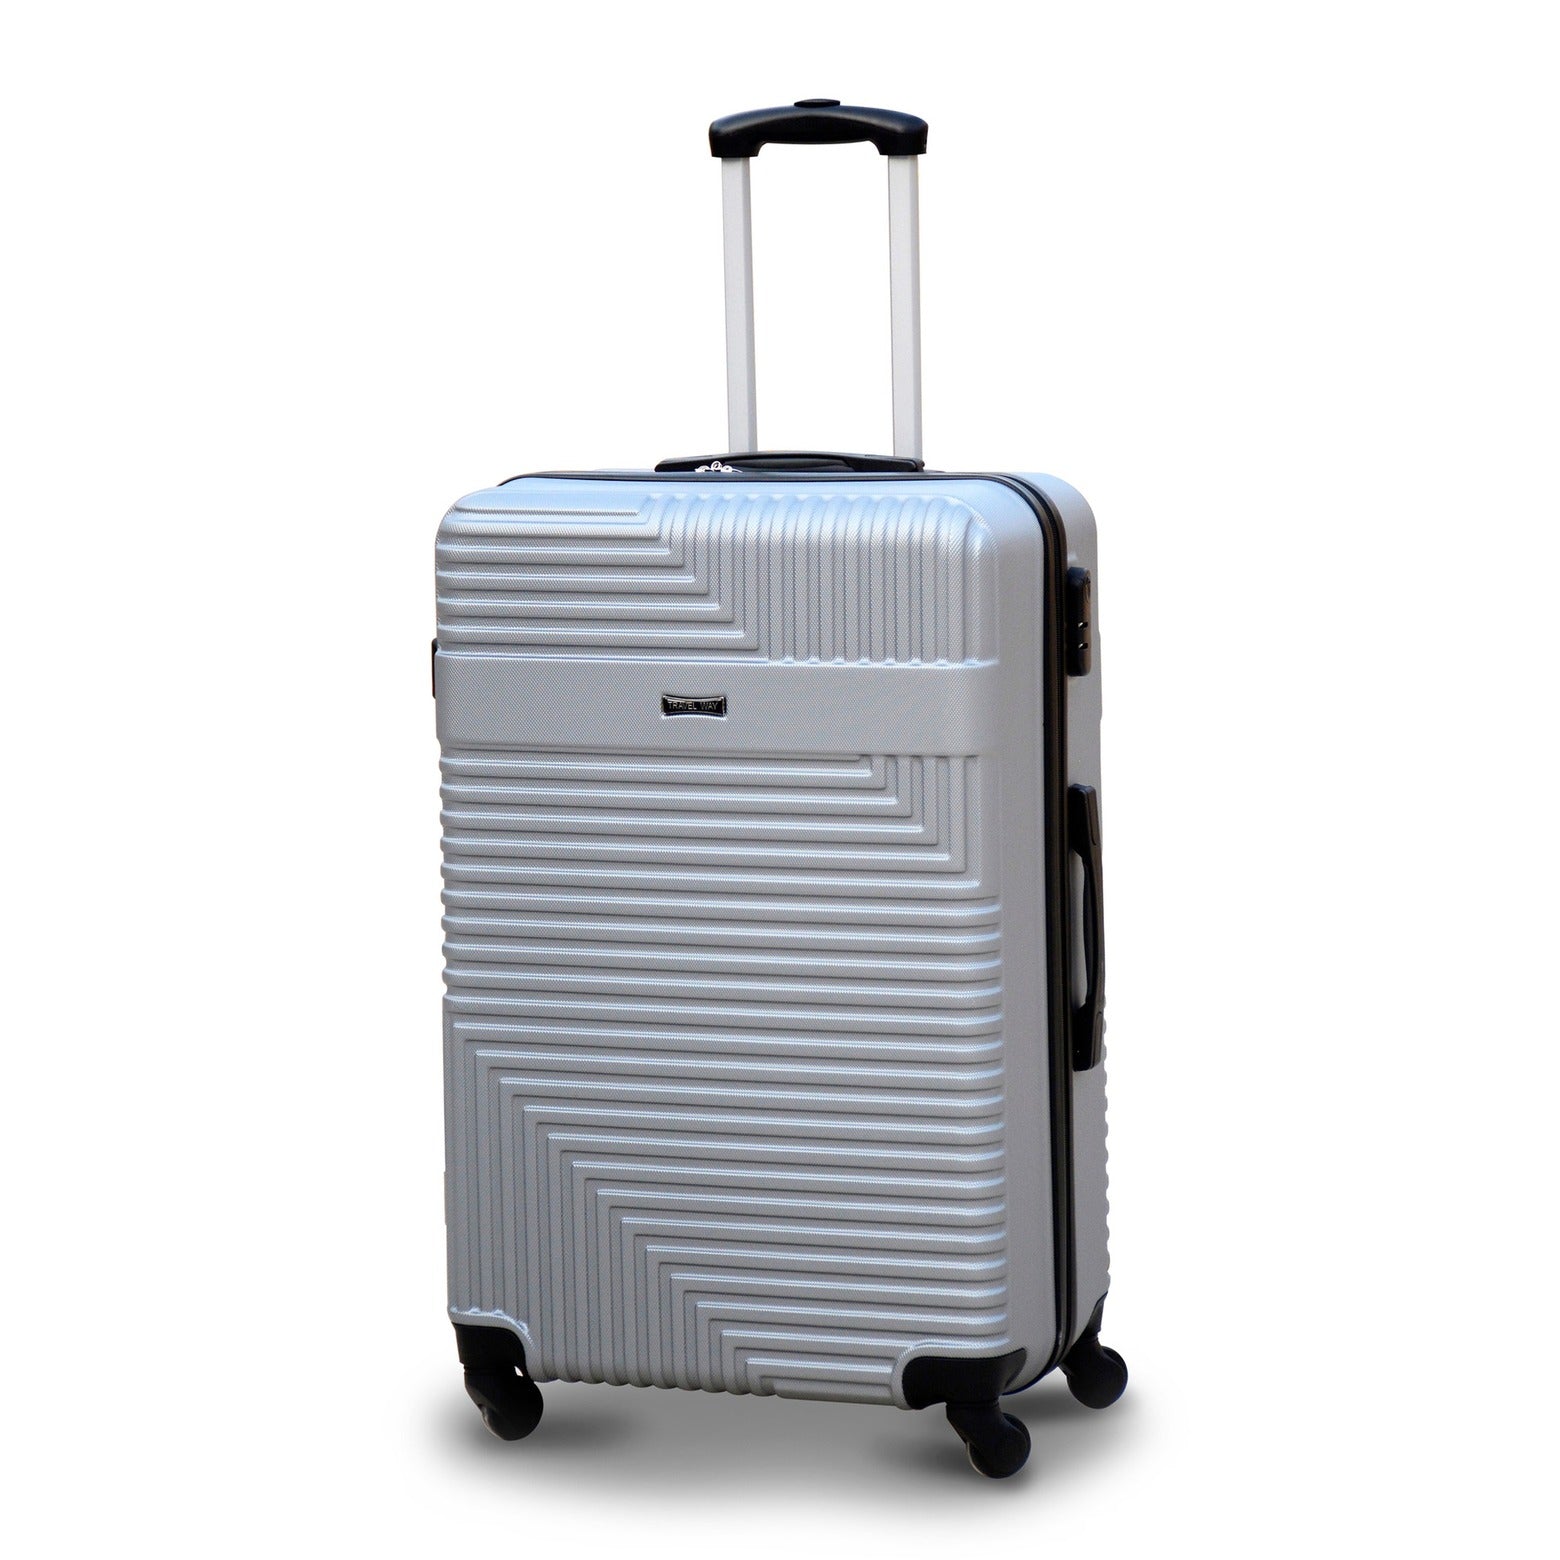 3 Piece Set 20" 24" 28 Inches Silver Colour Travel Way ABS Luggage lightweight Hard Case Trolley Bag Zaappy.com